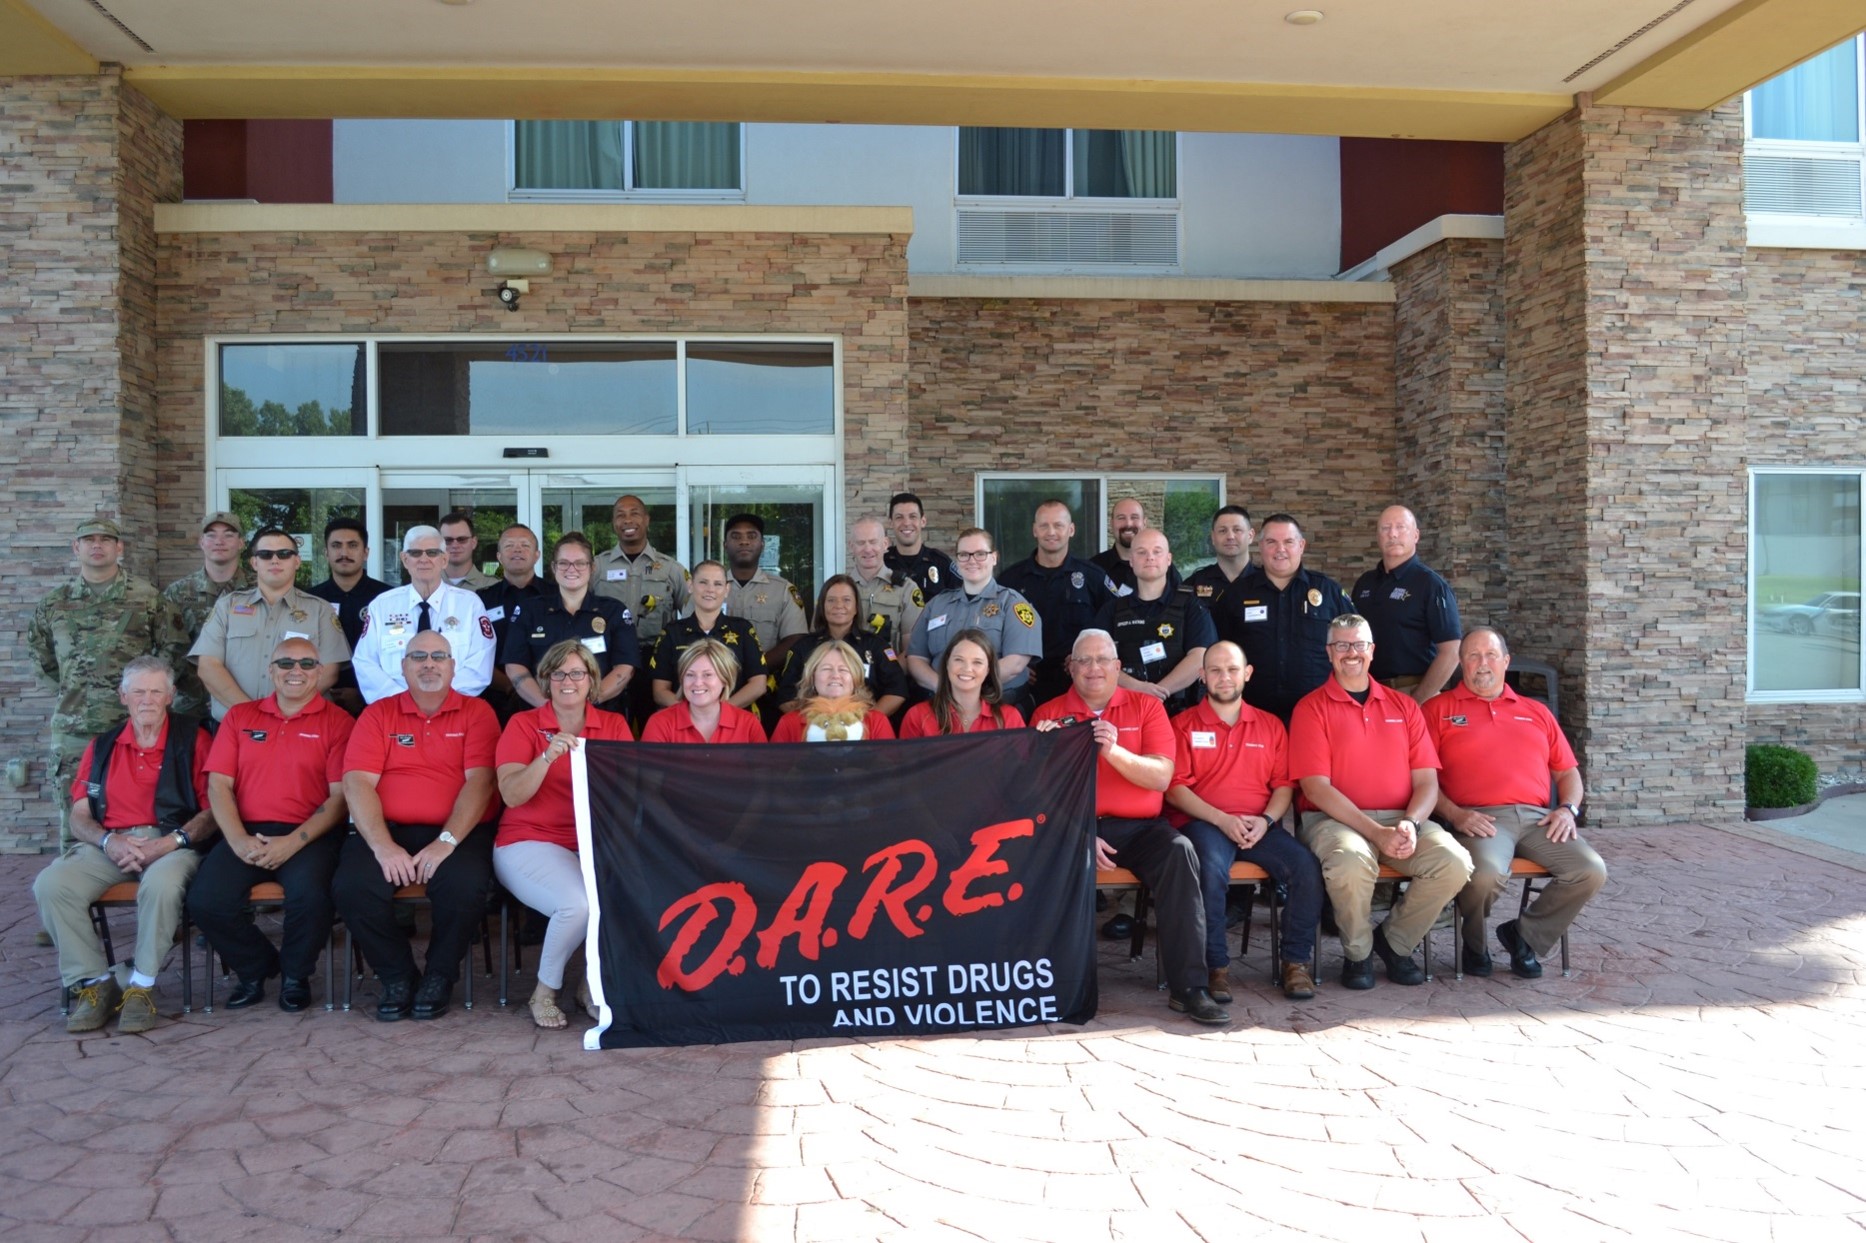 Class Photo from the D.A.R.E. Officer Training held on July 6 – 17, 2020 in Oklahoma City